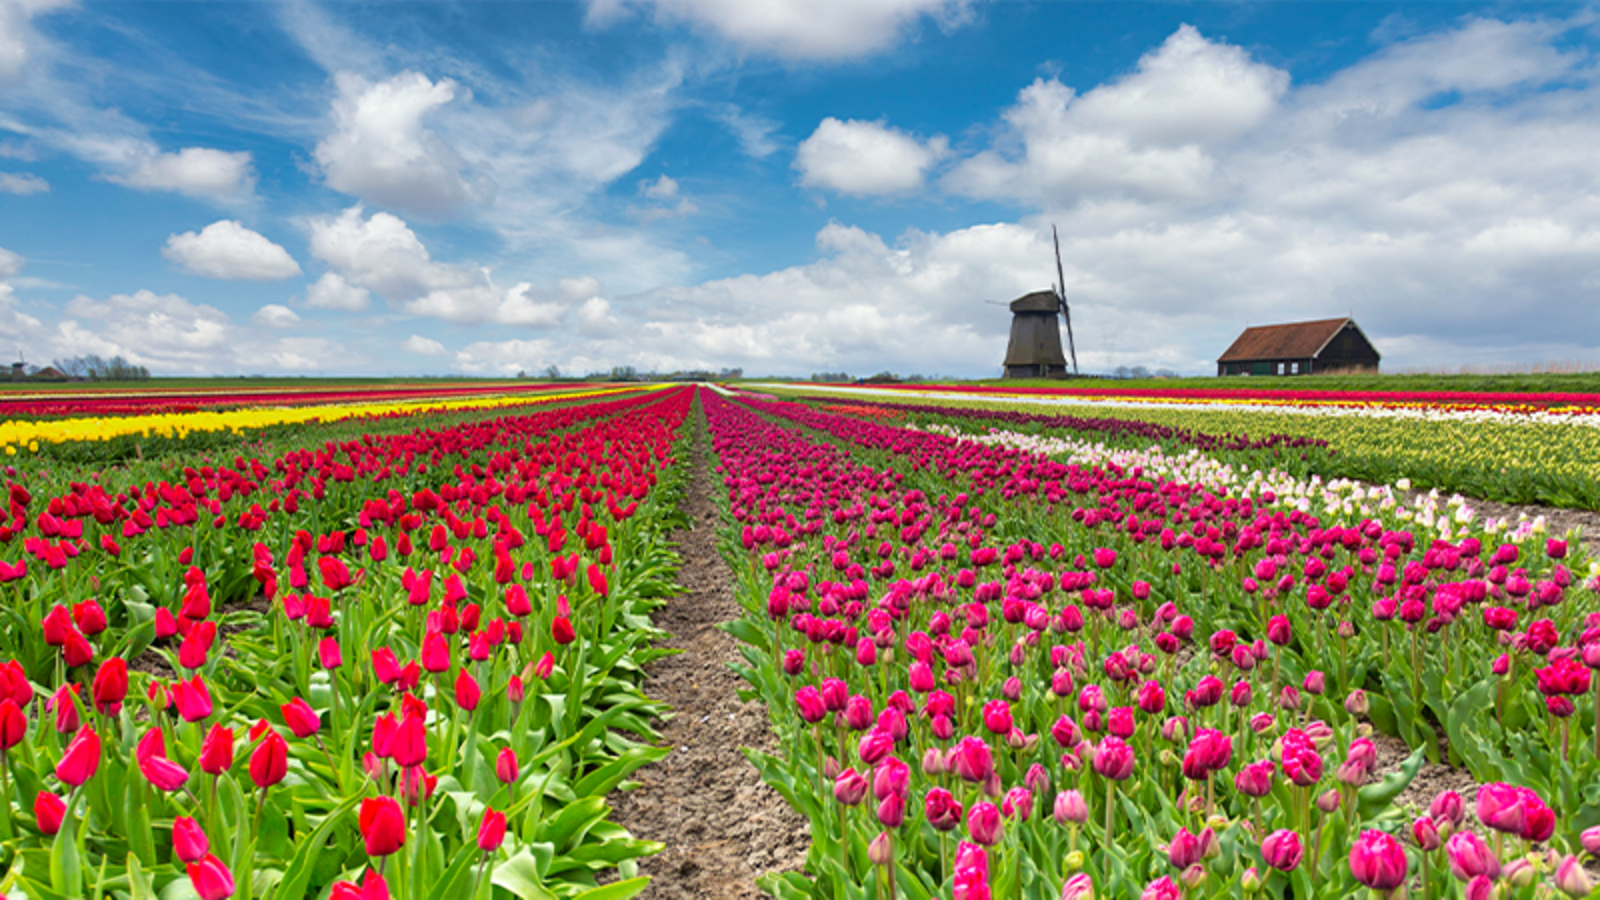 Fields of tulips in Amsterdam, with a windmill in the background